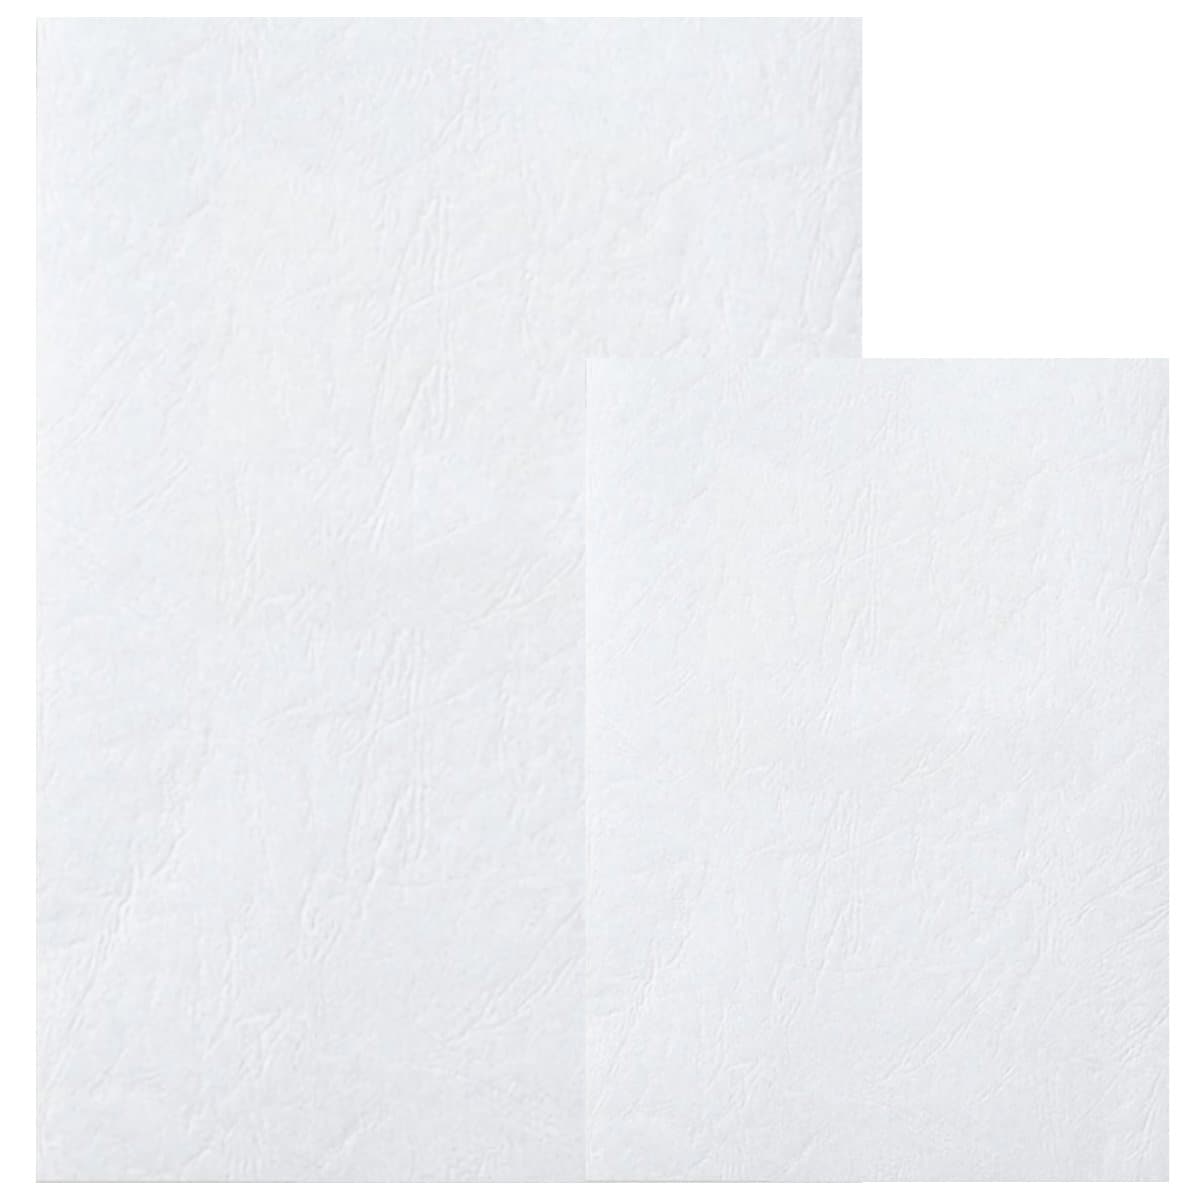 Deluxe Embossed Leather Board Binding Cover, 100/pack, White